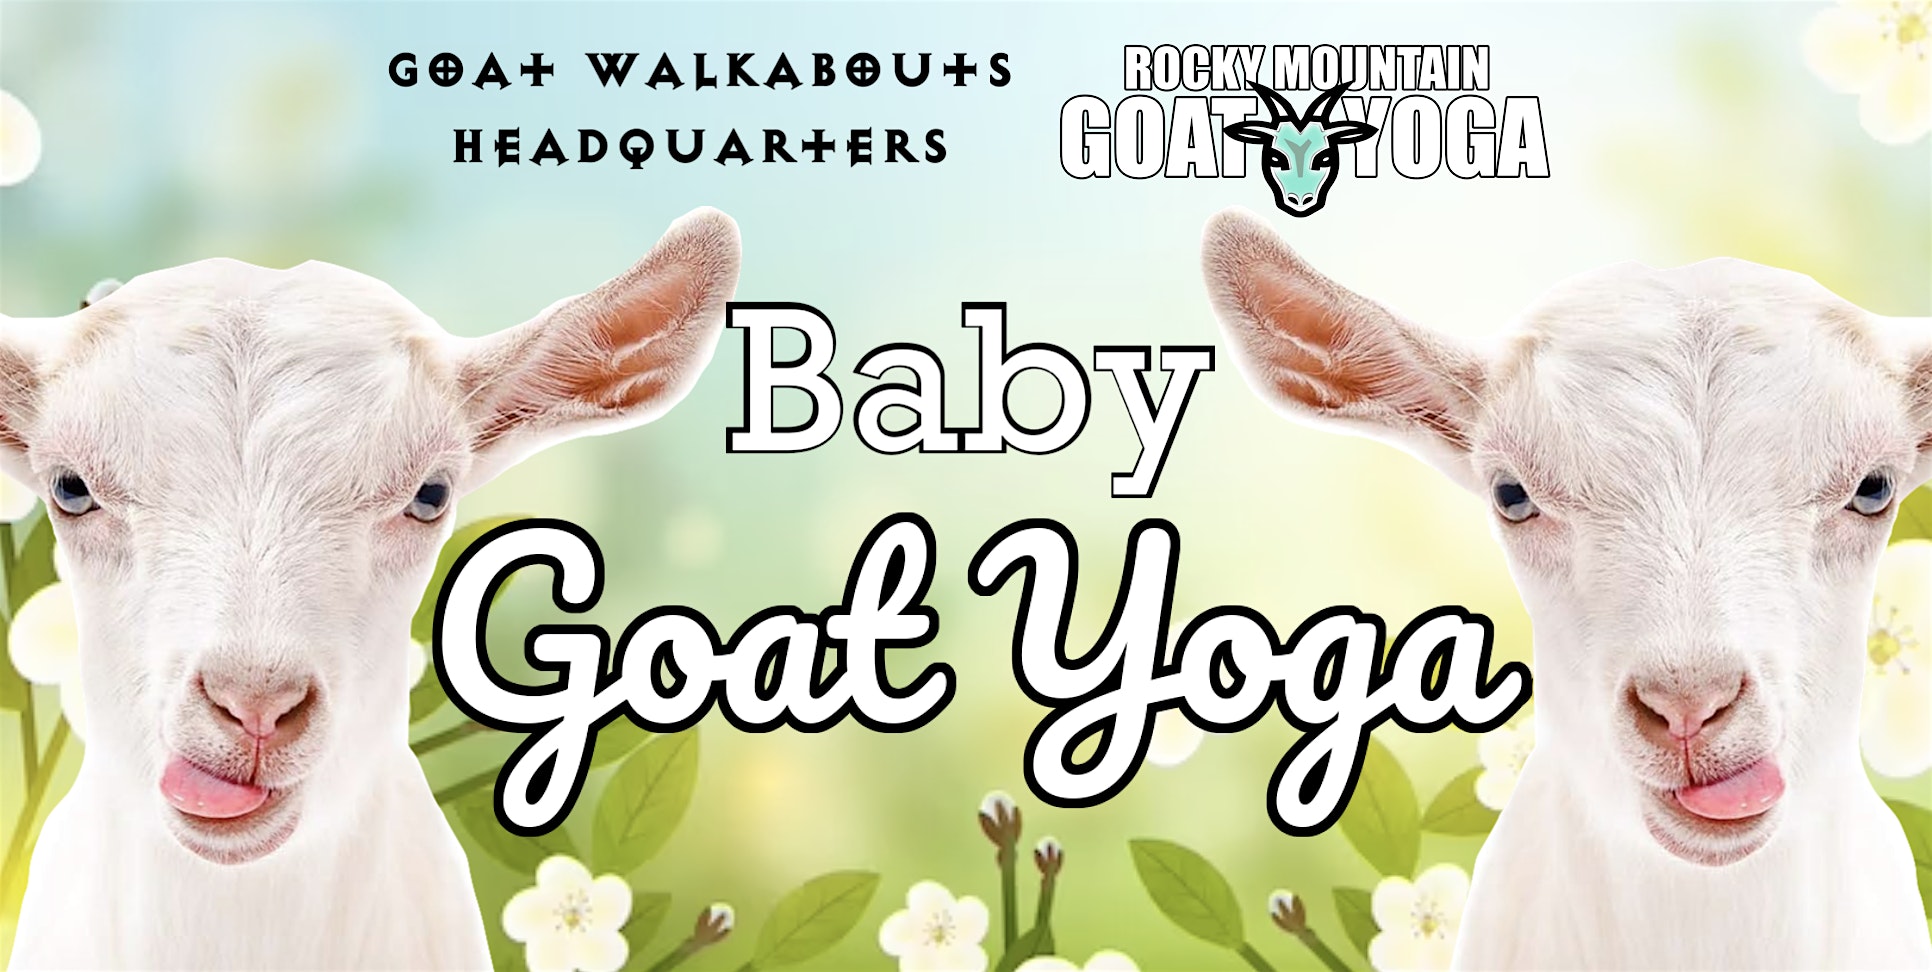 Baby Goat Yoga - September 14th (GOAT WALKABOUTS HEADQUARTERS)